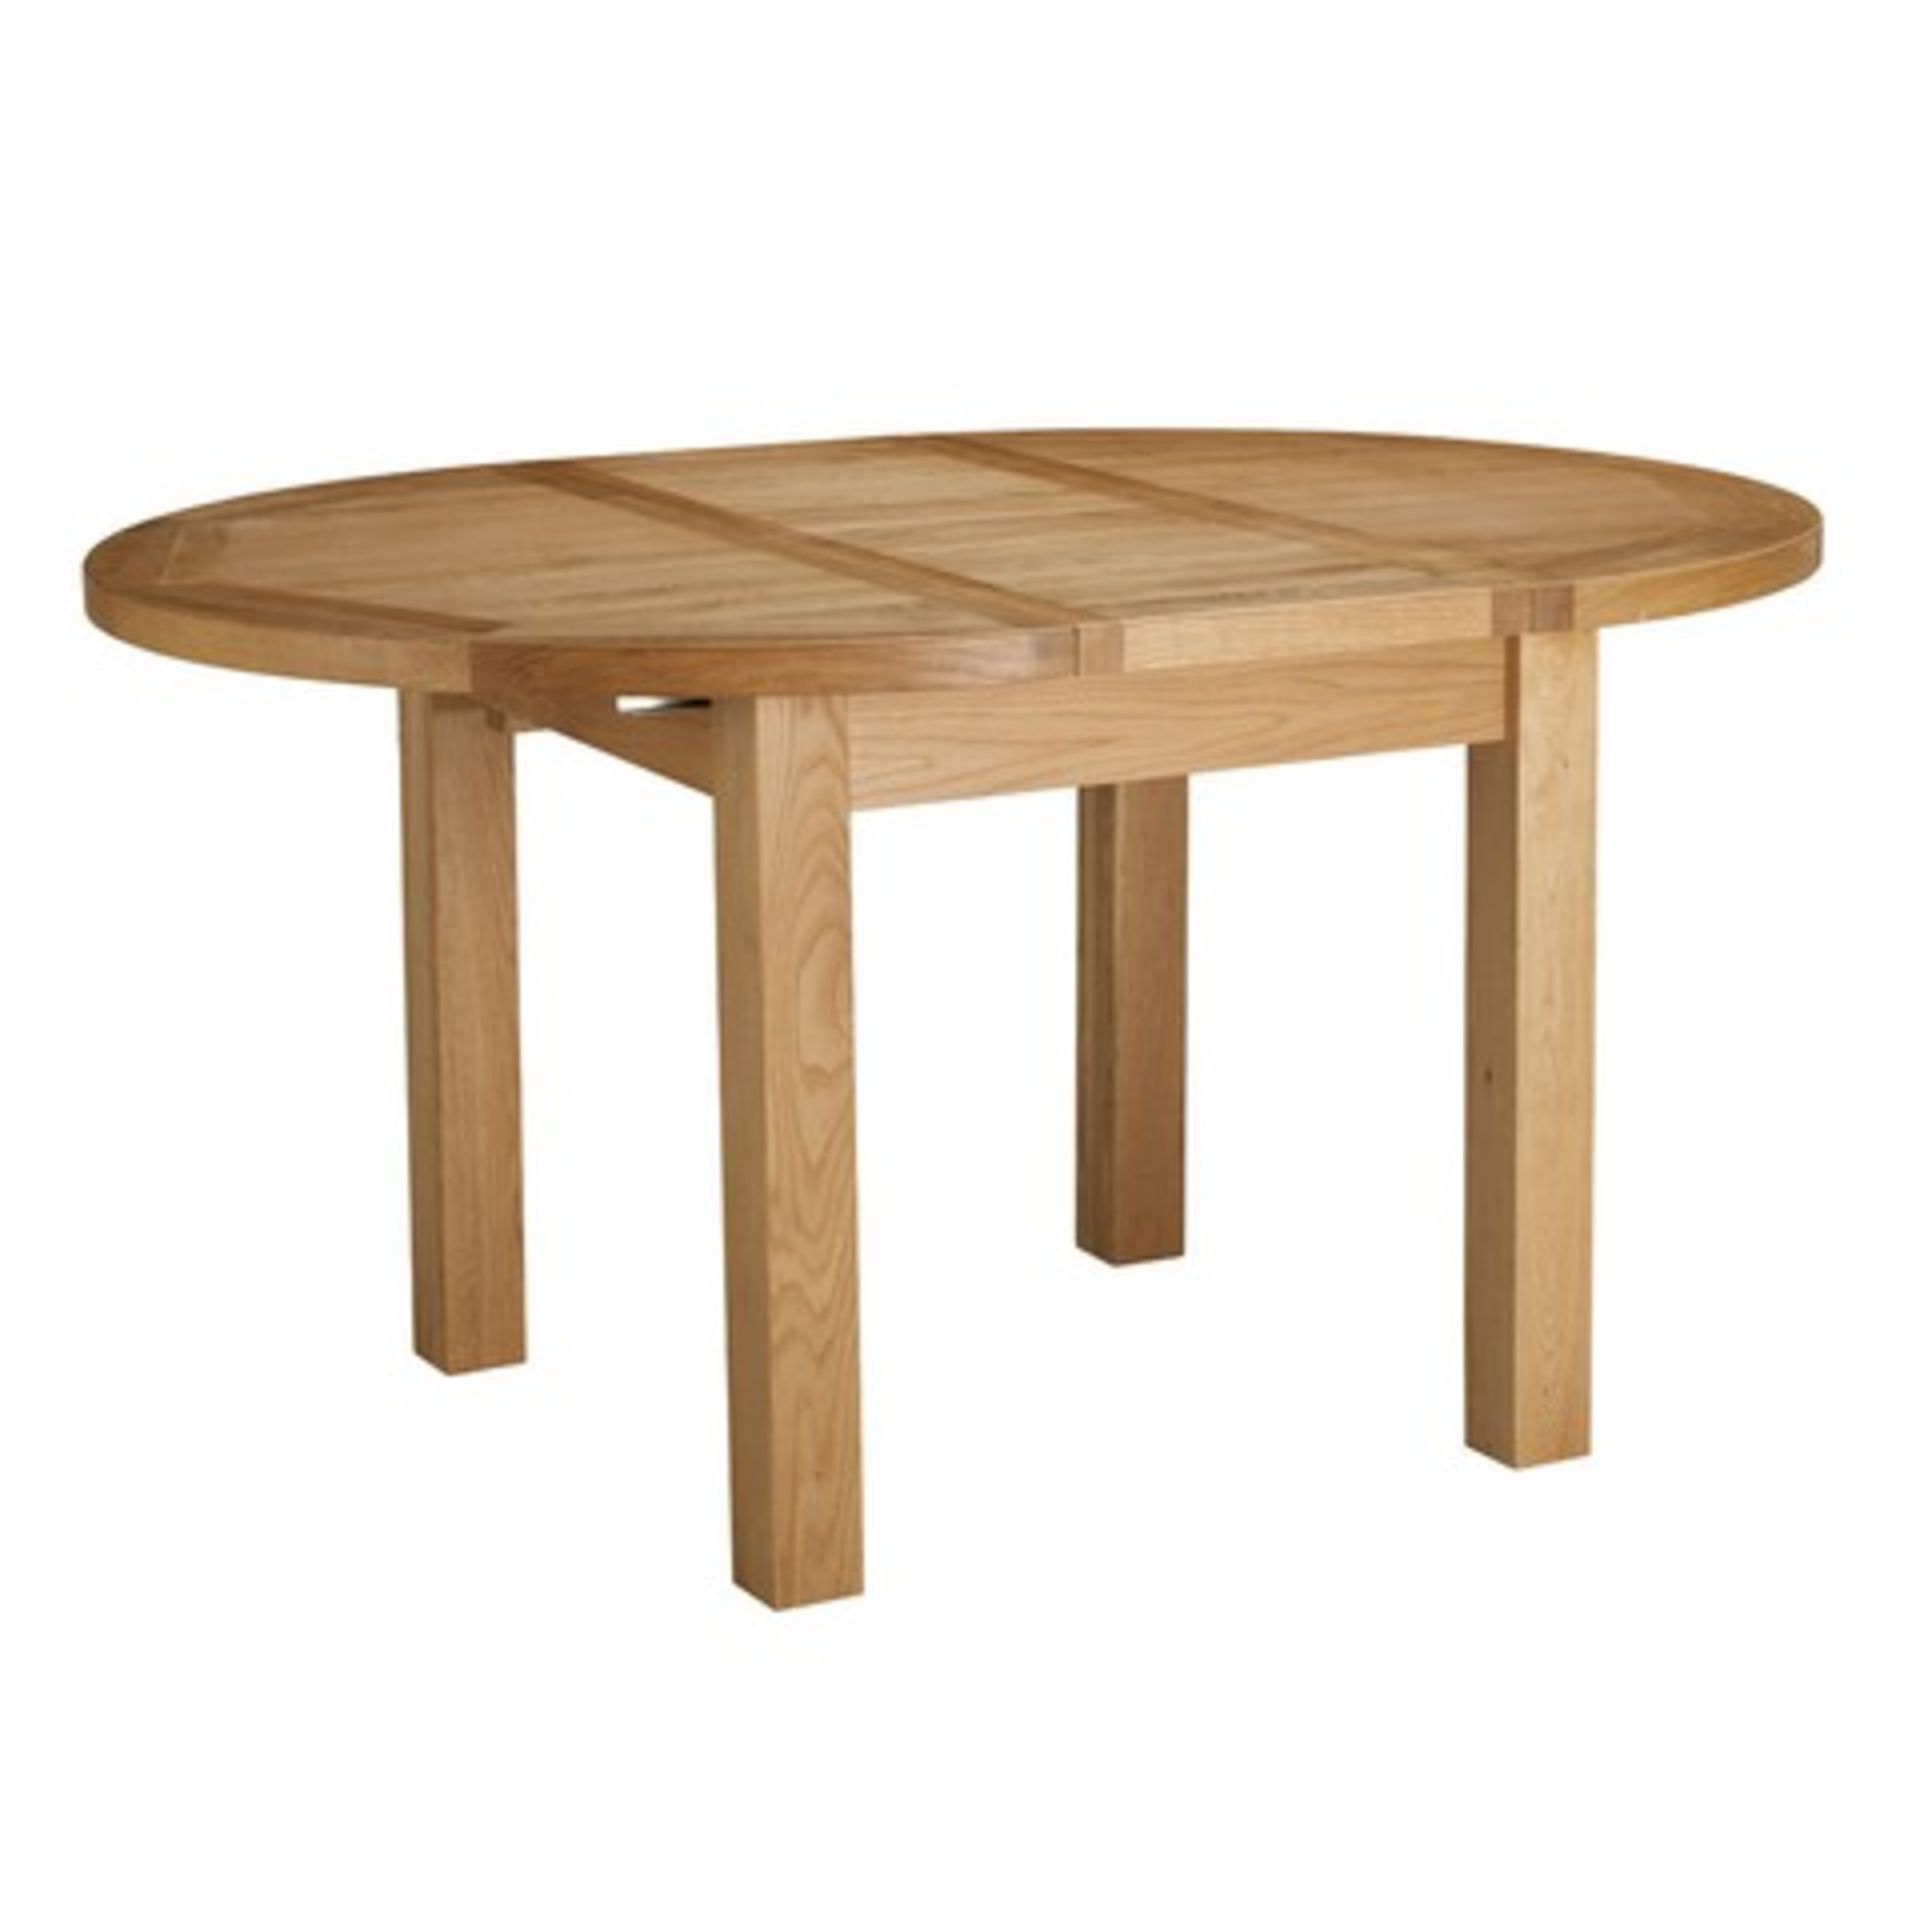 + VAT Brand New Chiswick Oak 120 x 80 Butterfly Extension Table 120/166w x 80d x 77h cms ISP £405.